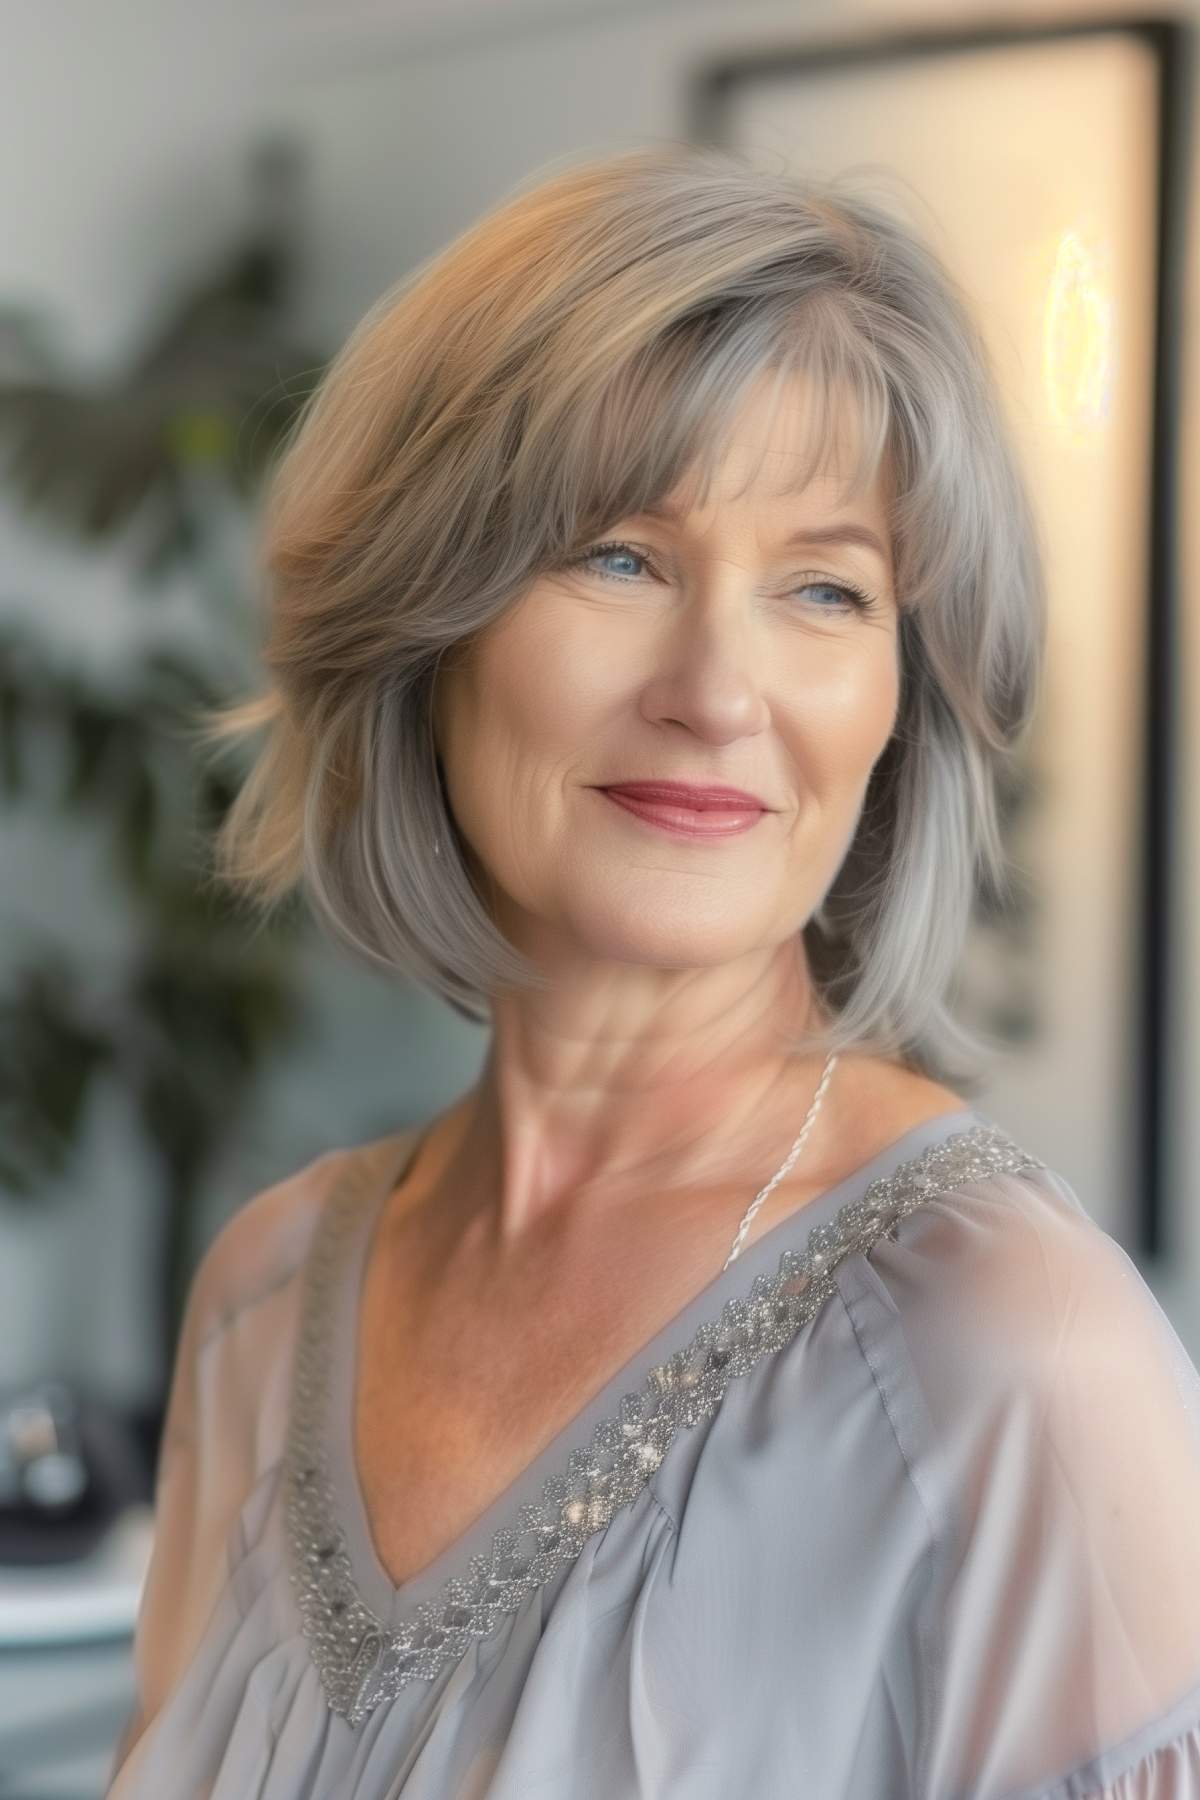 Low-maintenance layered haircut on a woman over 50, featuring a natural gray and brown color blend with soft framing layers.